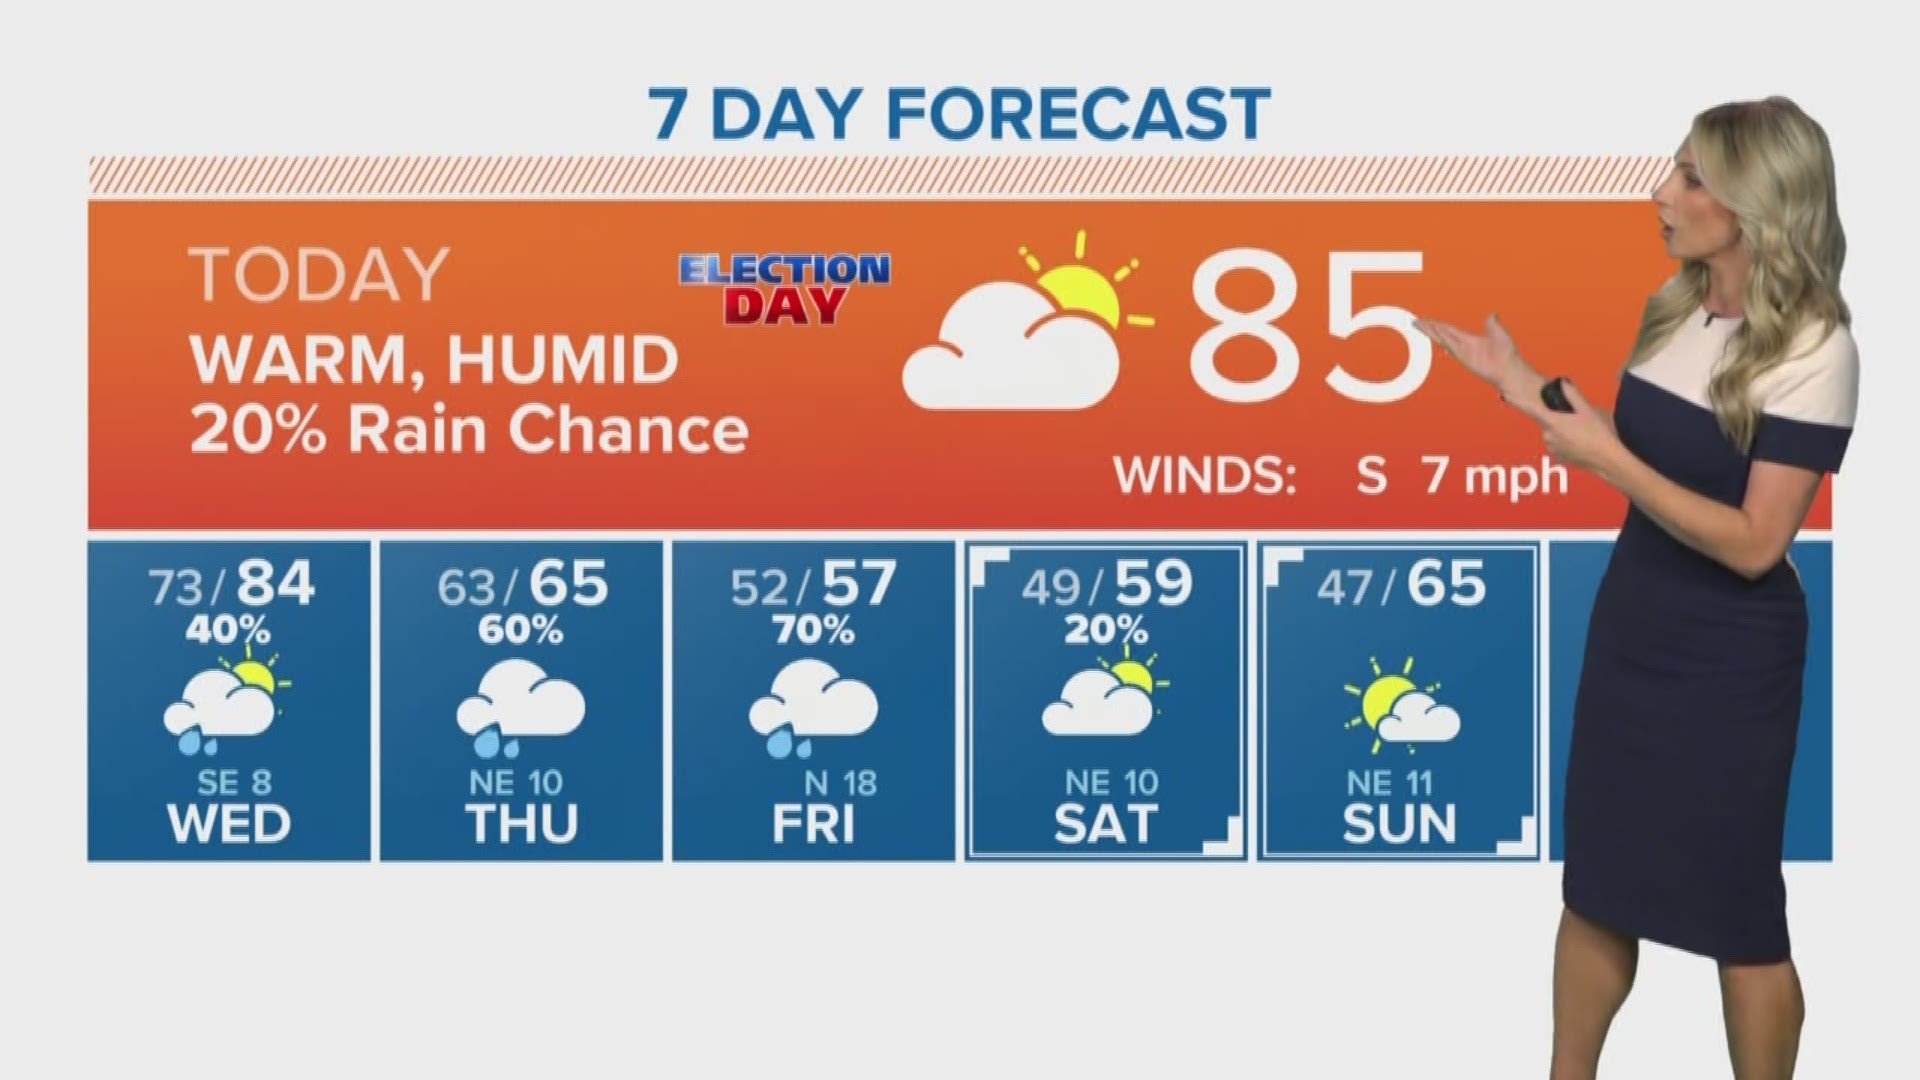 KHOU 11 Meteorologist Chita Craft says it will be warm and humid on Election Day with above-average temperatures.